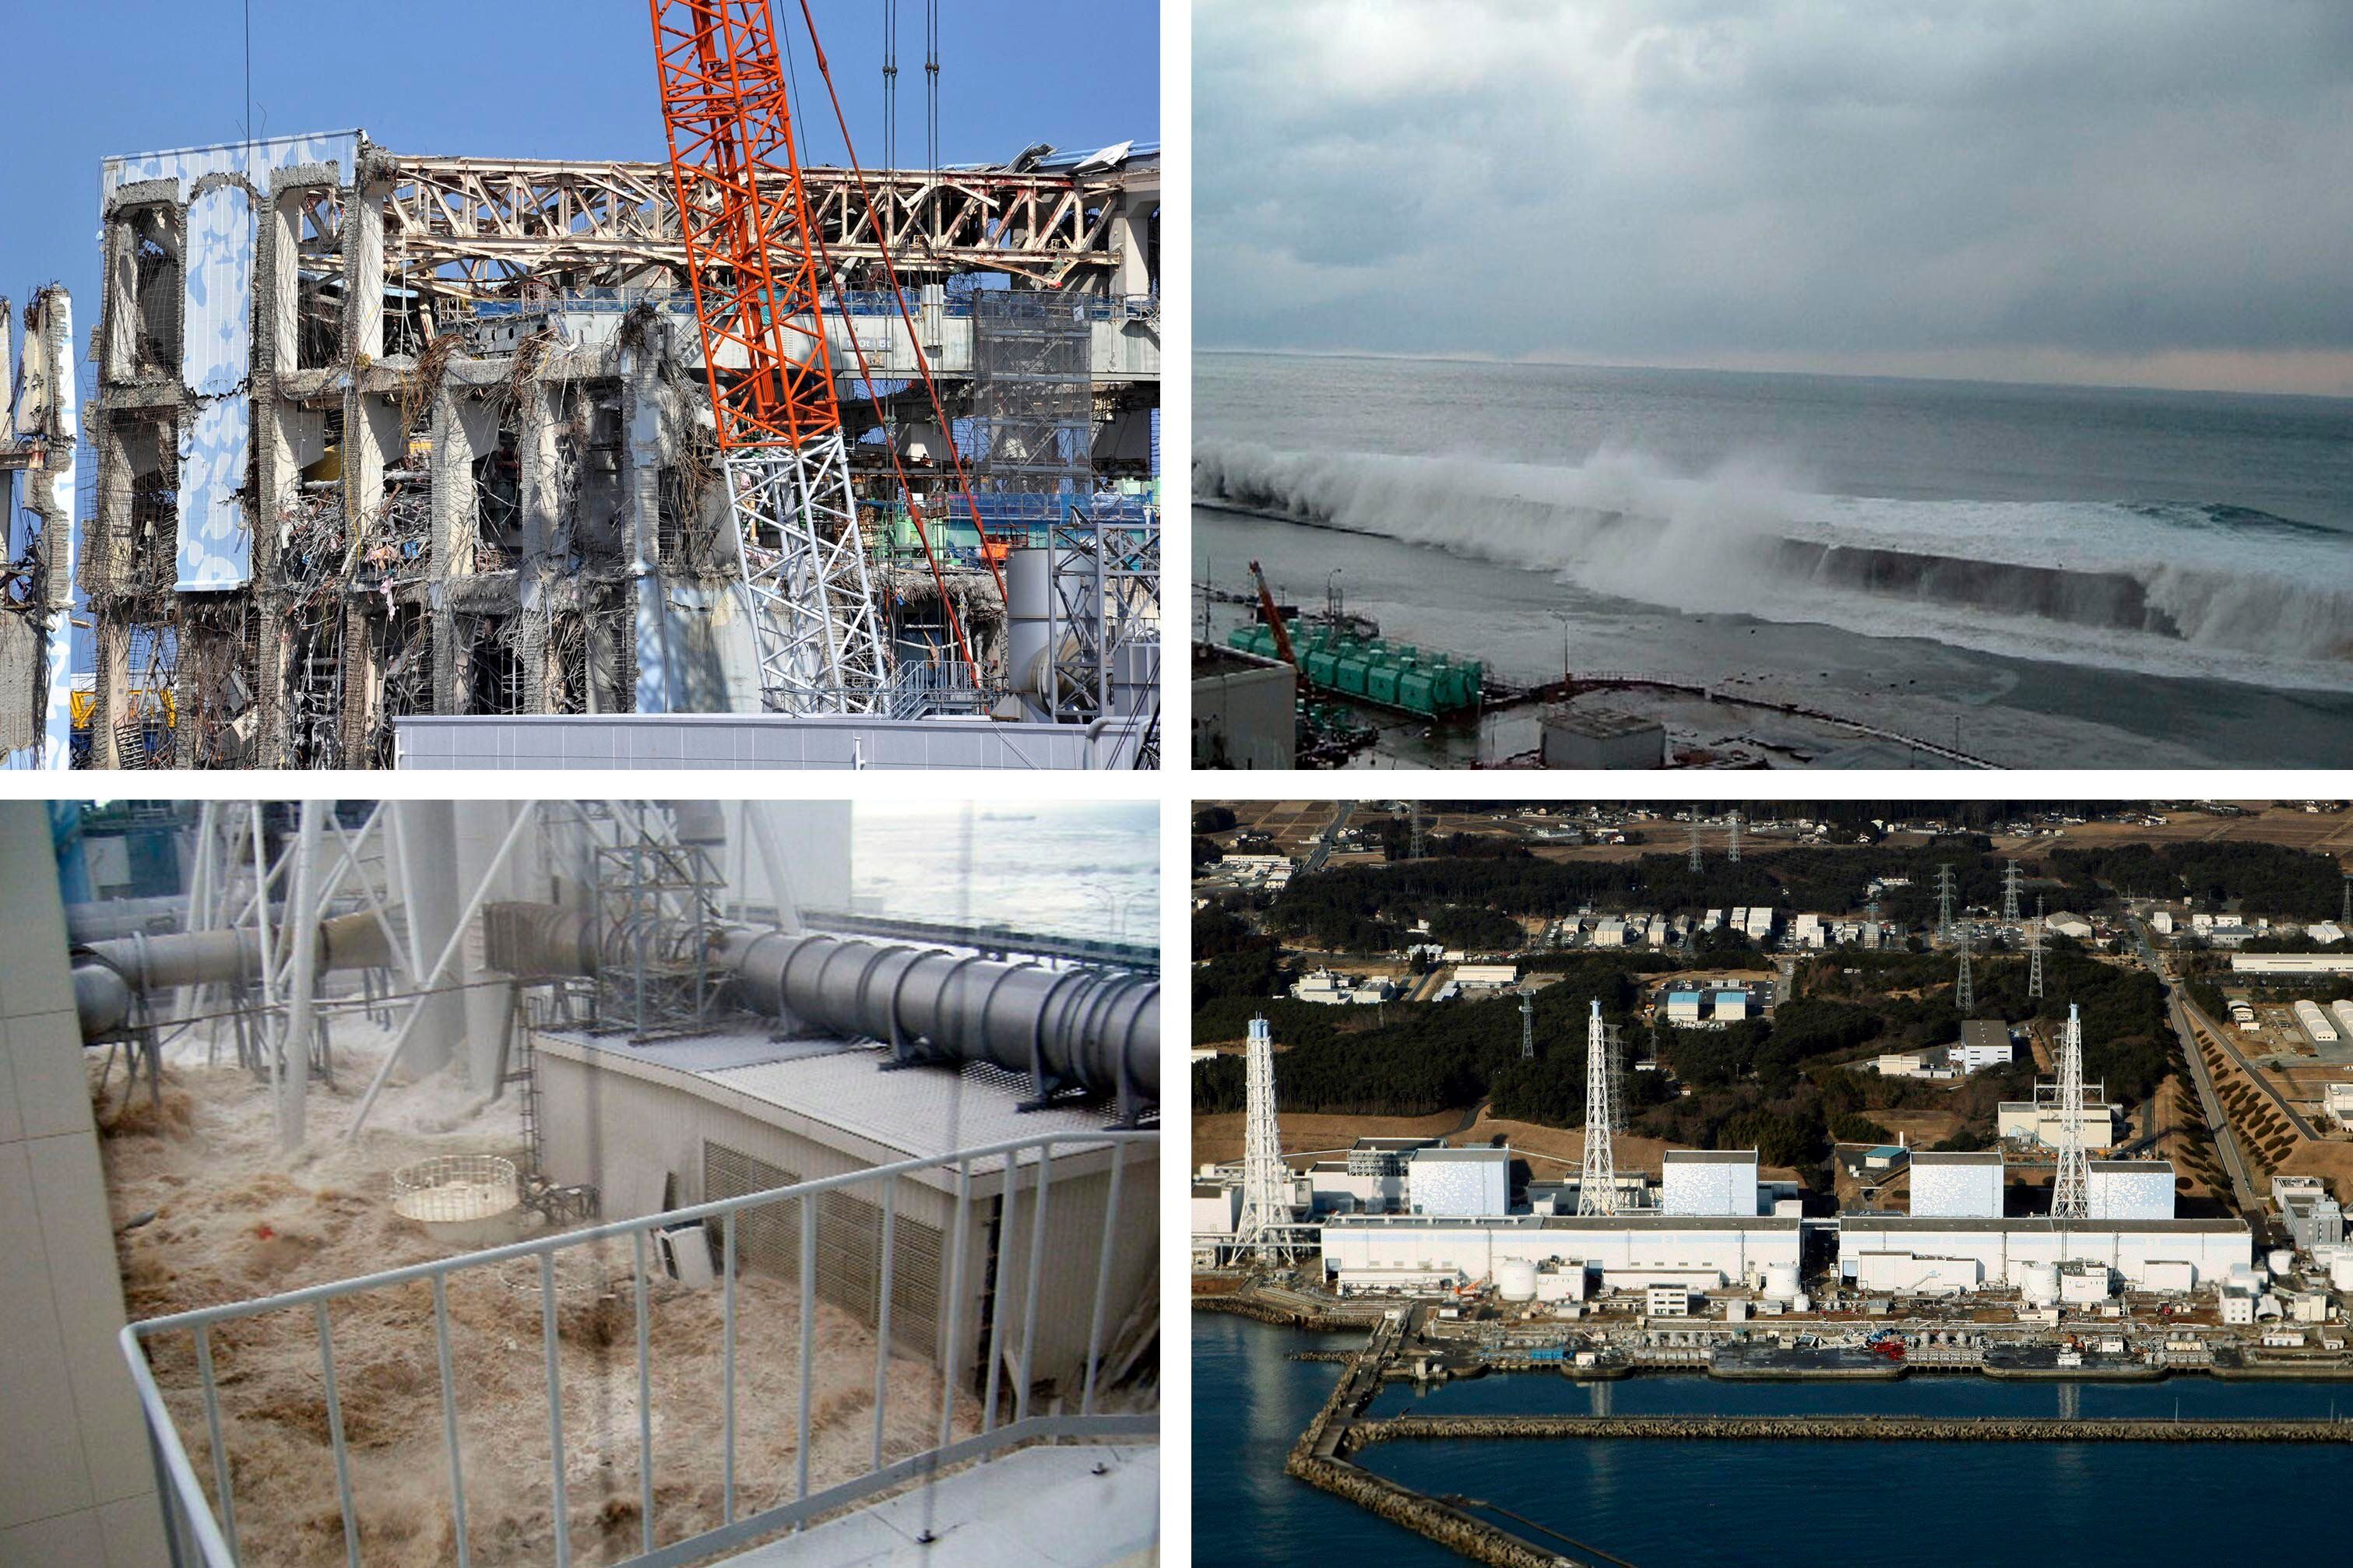 Top left: The Unit 4 reactor building of the Fukushima Daiichi nuclear power plant in northeastern Japan on Feb. 28, 2012. The country’s 2011 tsunami and earthquake triggered the worst nuclear accident since Chernobyl in 1986. Top right: The east side of Unit 5 on March 11, 2011. Bottom left: Wearing special protective gear, workers clean up the Fukushima Daiichi nuclear site on June 12, 2015. Bottom right: An aerial view of the Fukushima nuclear power plant on March 12, 2011. Credit: Getty/AP